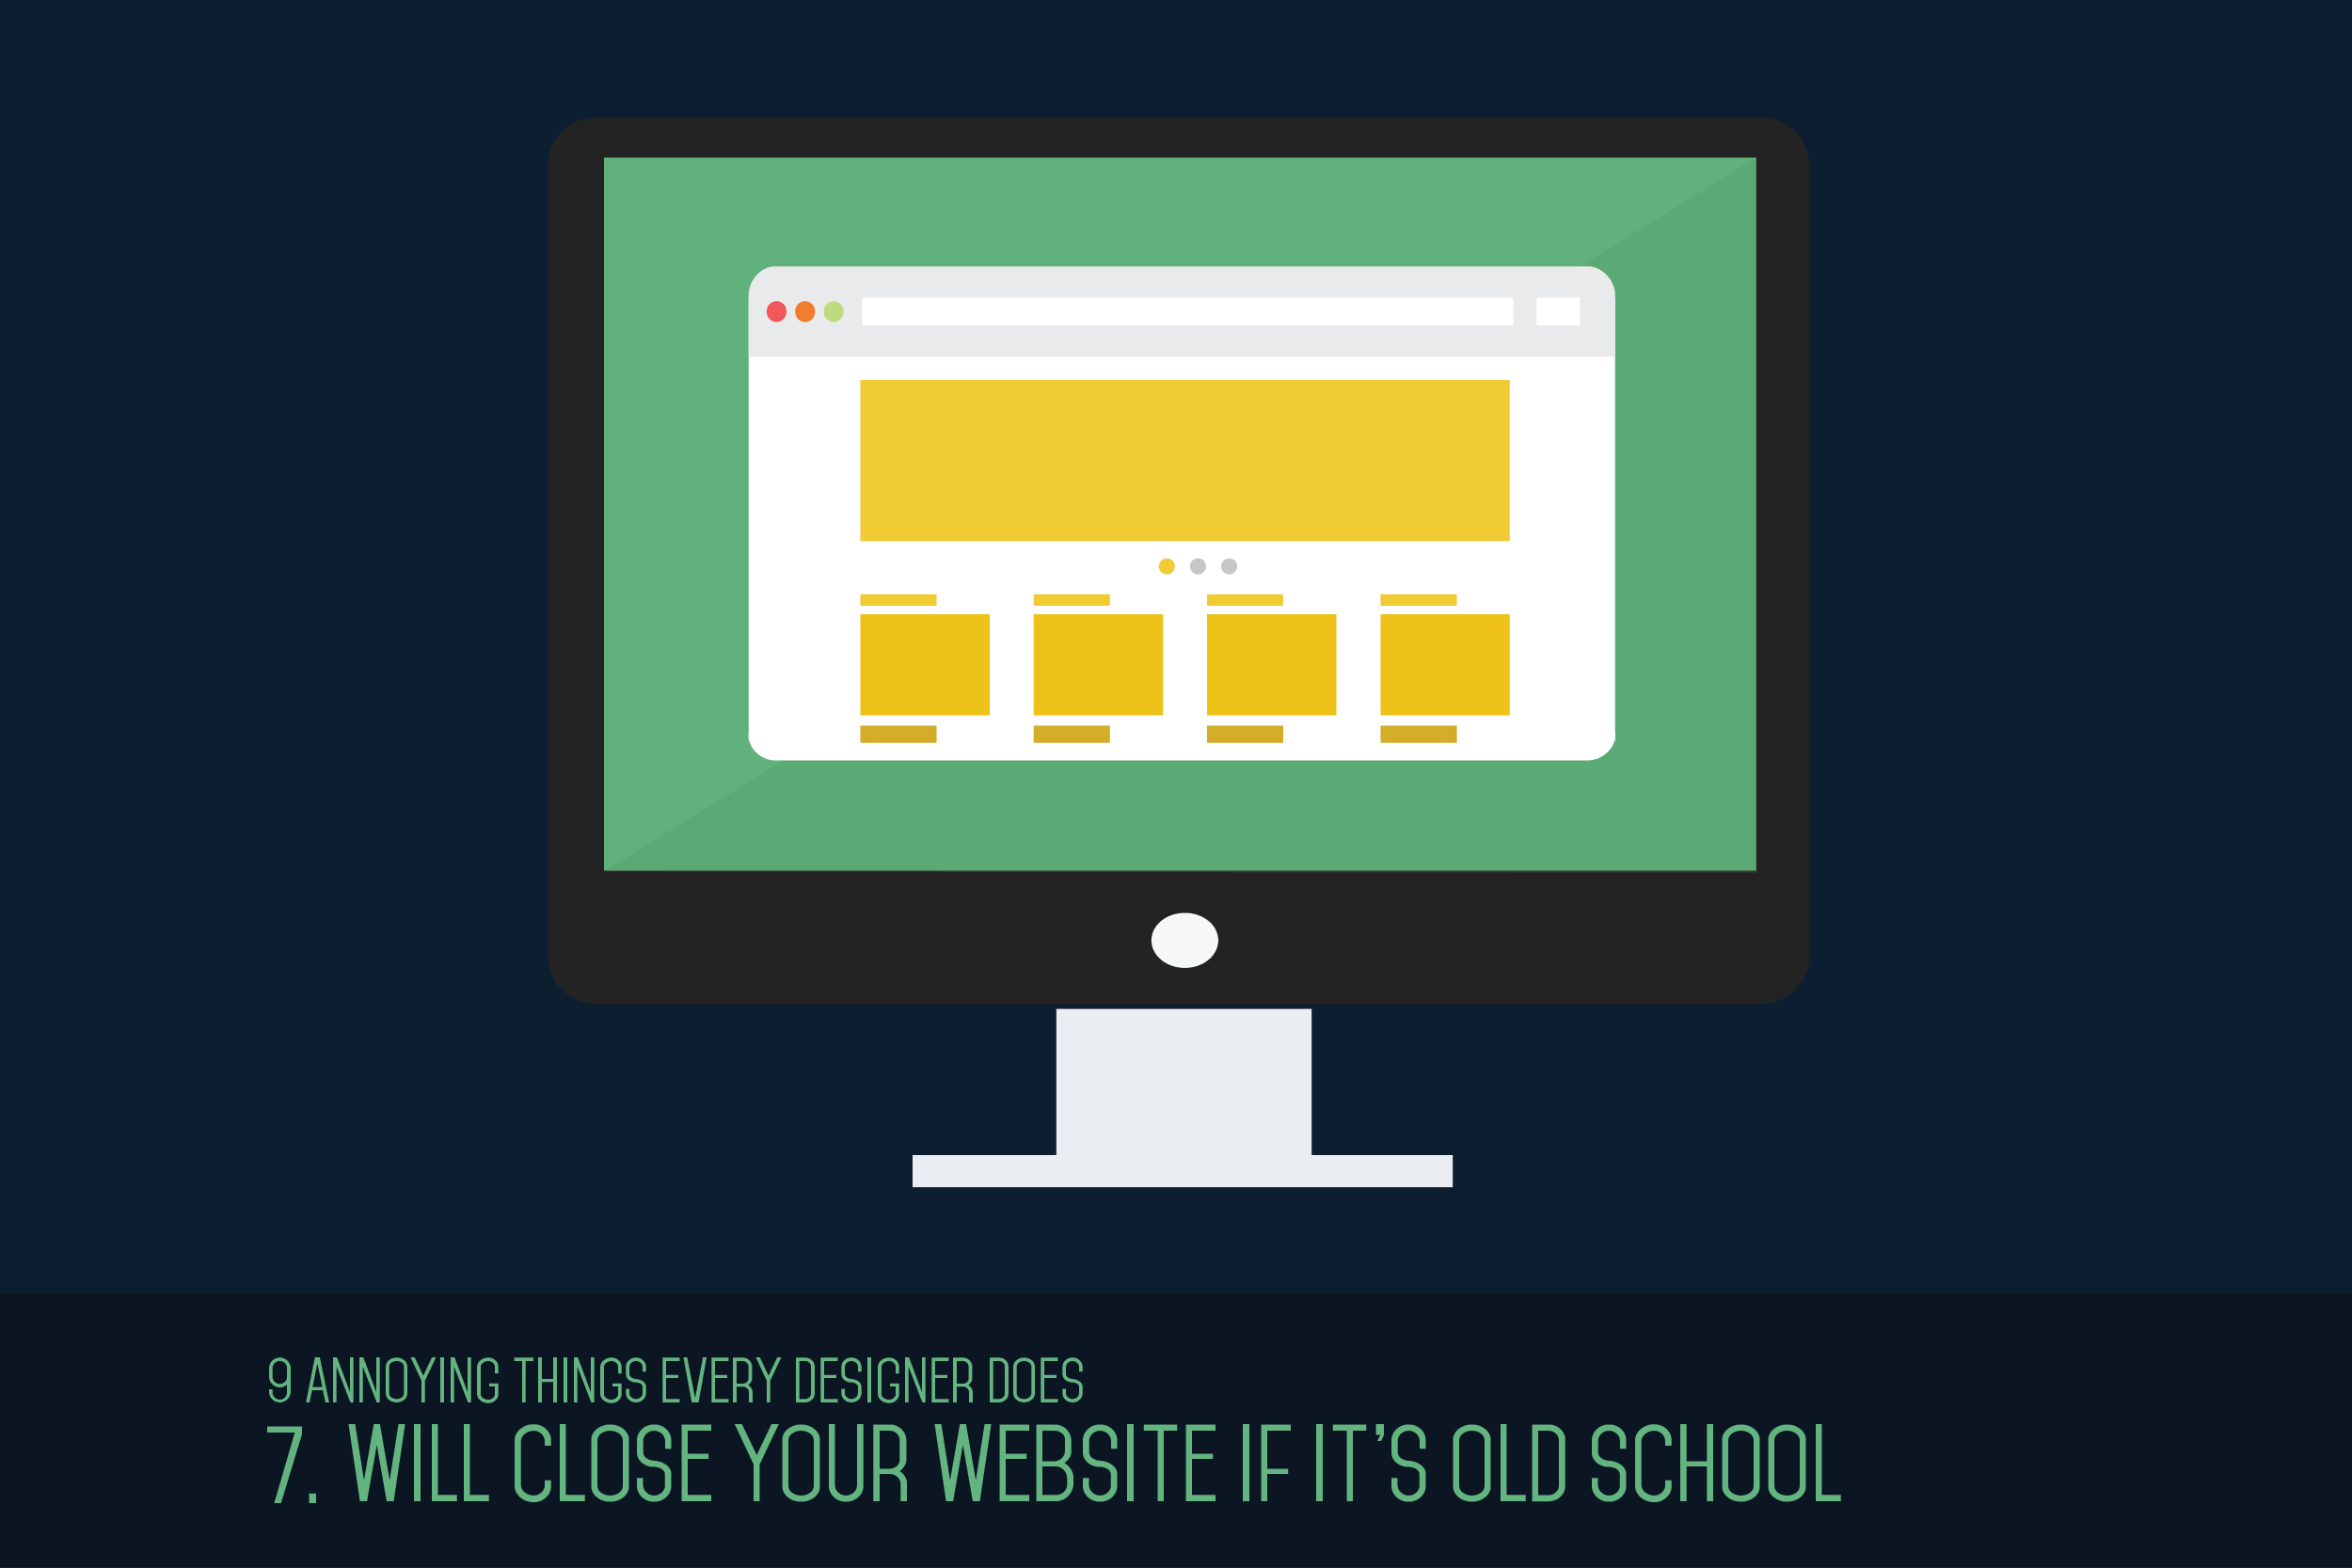 Will Close Your Website If It's Old School